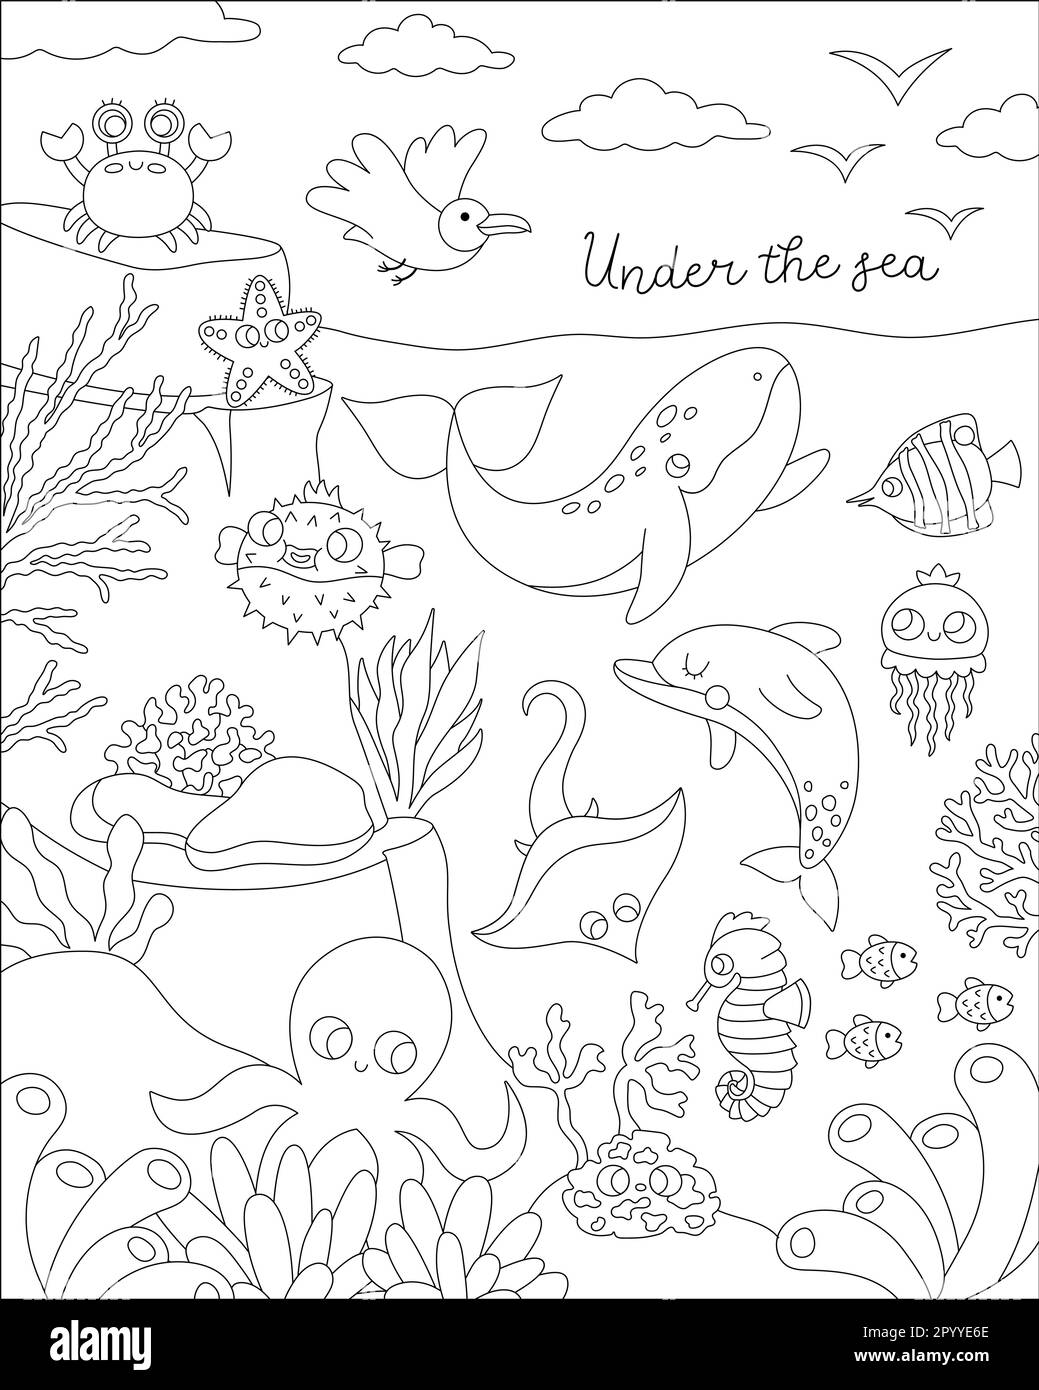 Vector black and white under the sea landscape illustration with rock slope. Ocean life line scene with animals, dolphin, whale, shark, seagull, sun. Stock Vector